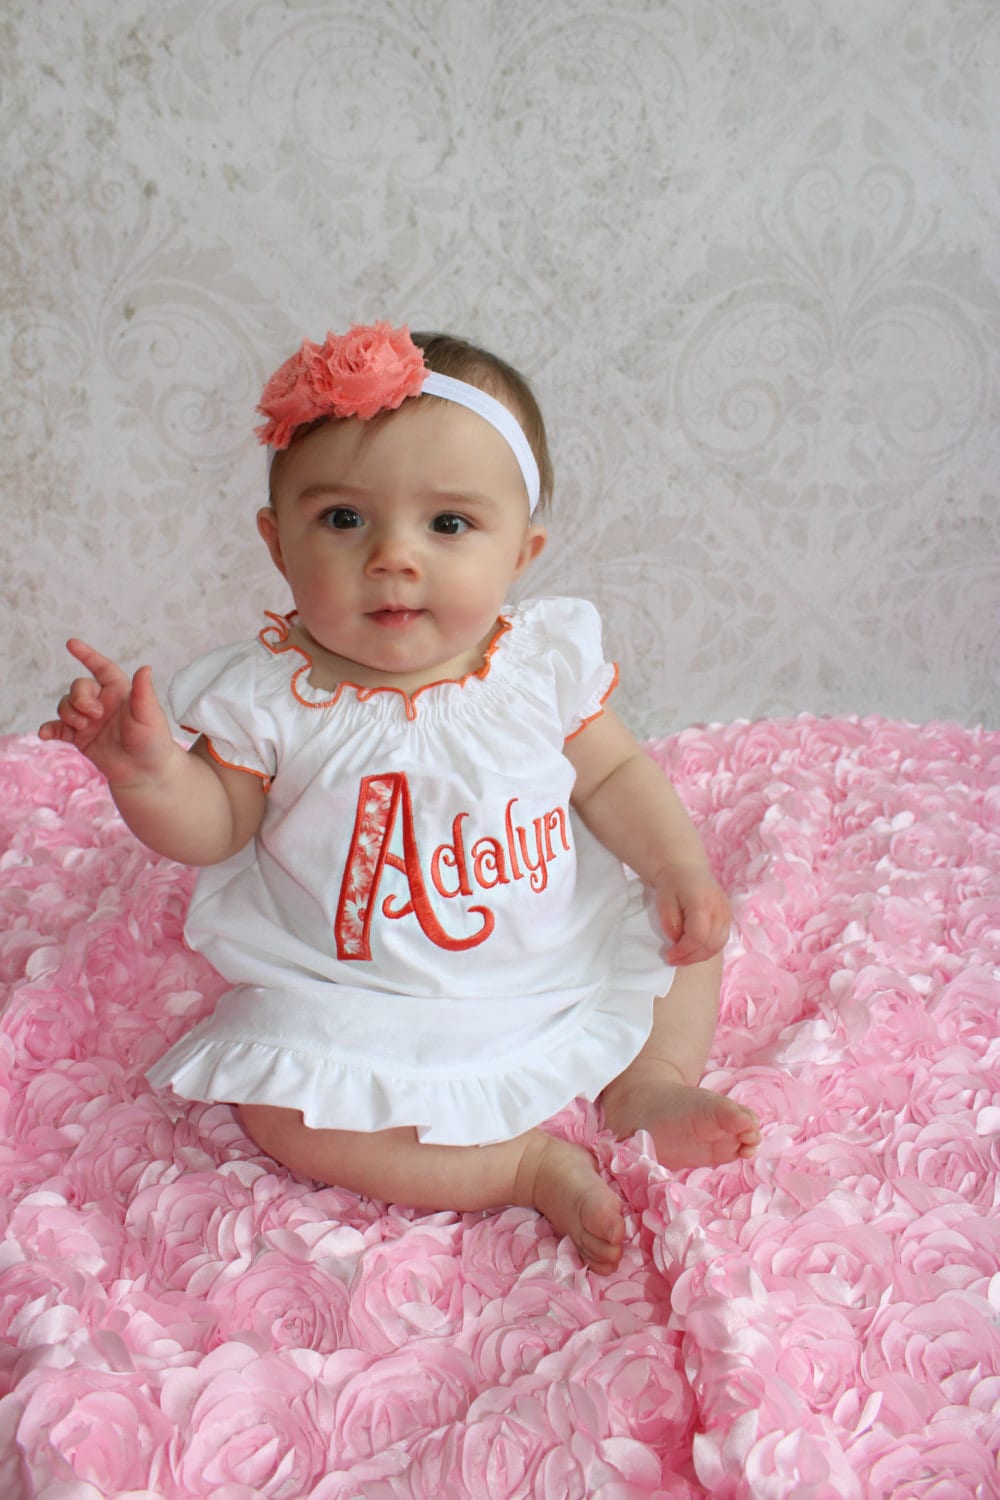 Cute Baby Clothes Baby Dress Personalized Girl Newborn Baby